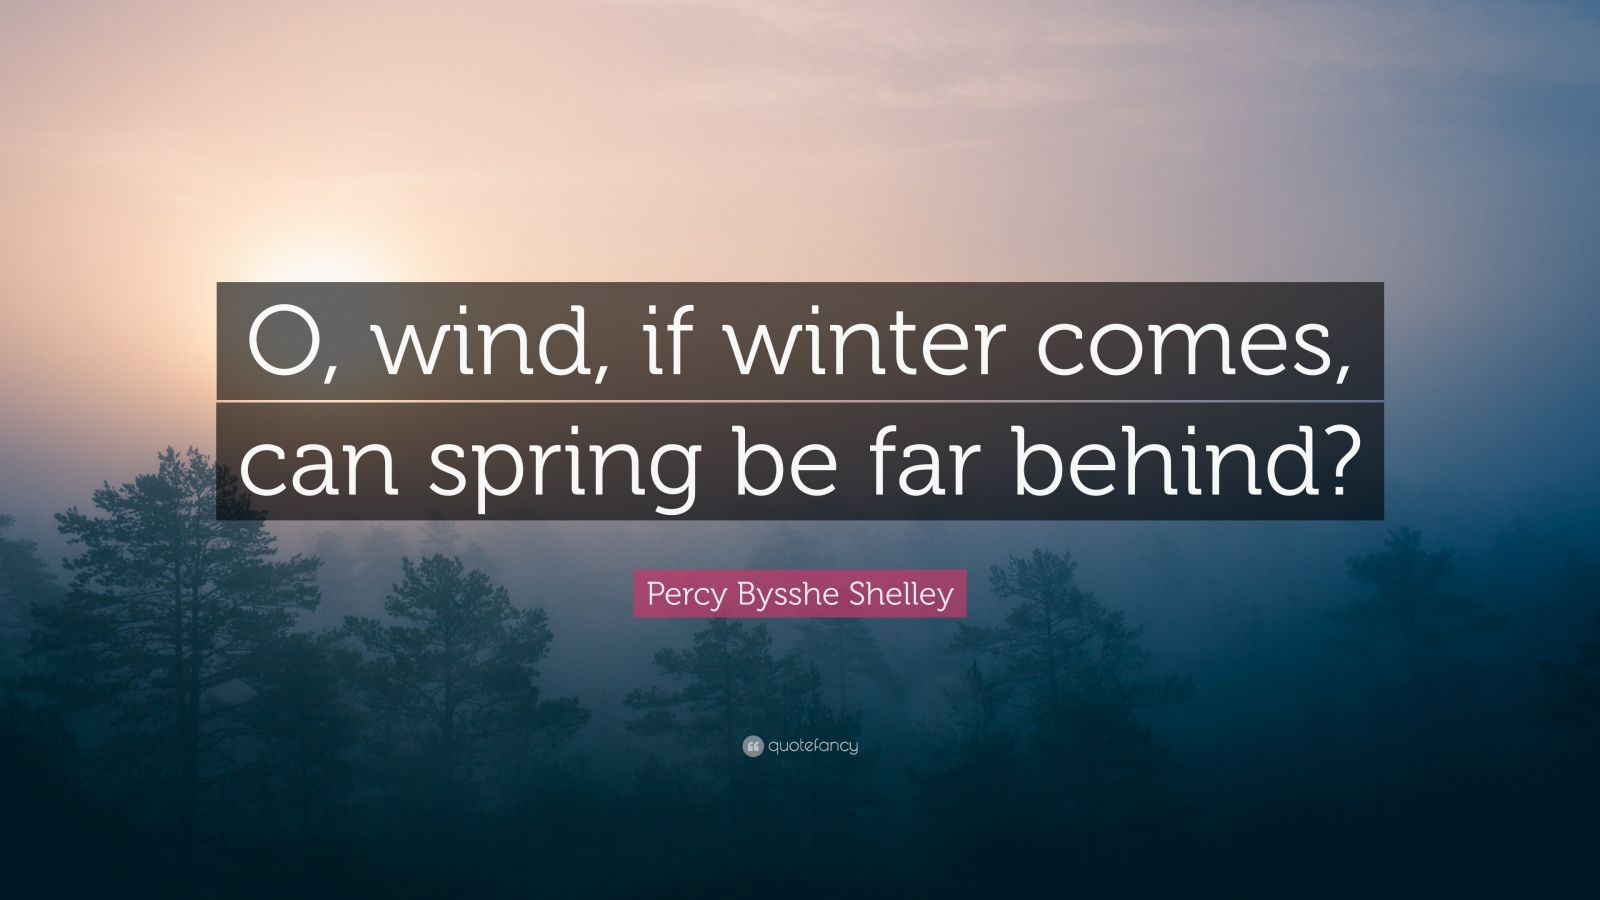 Percy Bysshe Shelley Quote: “O, wind, if winter comes, can spring